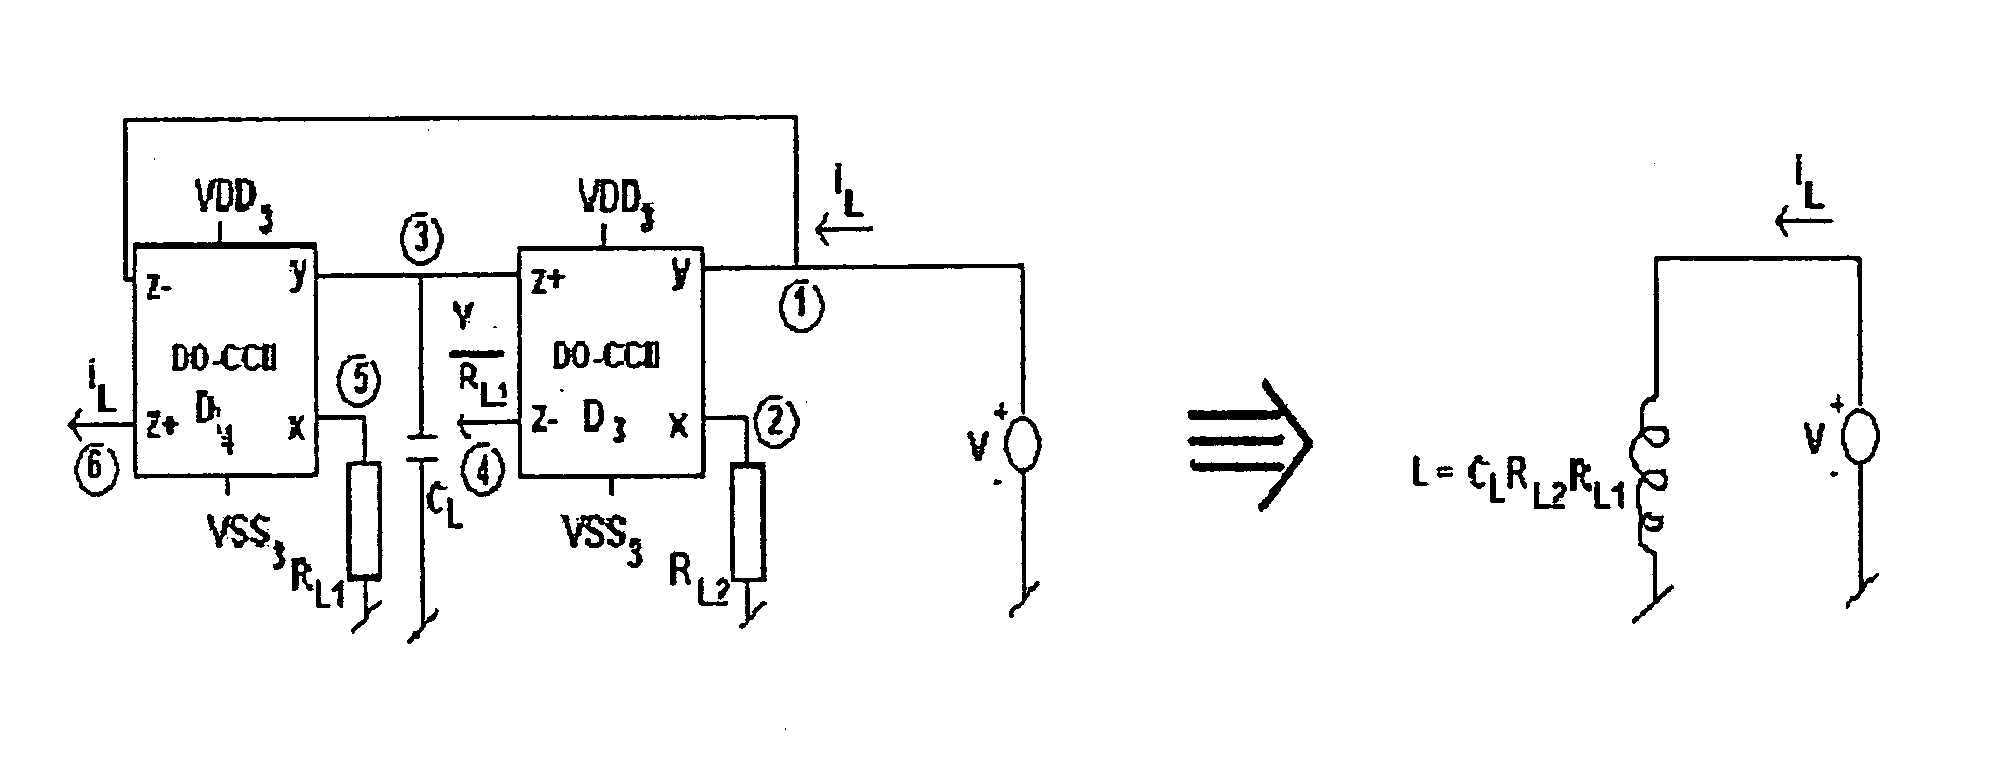 Chua's circuit and it's use in hyperchaotic circuit